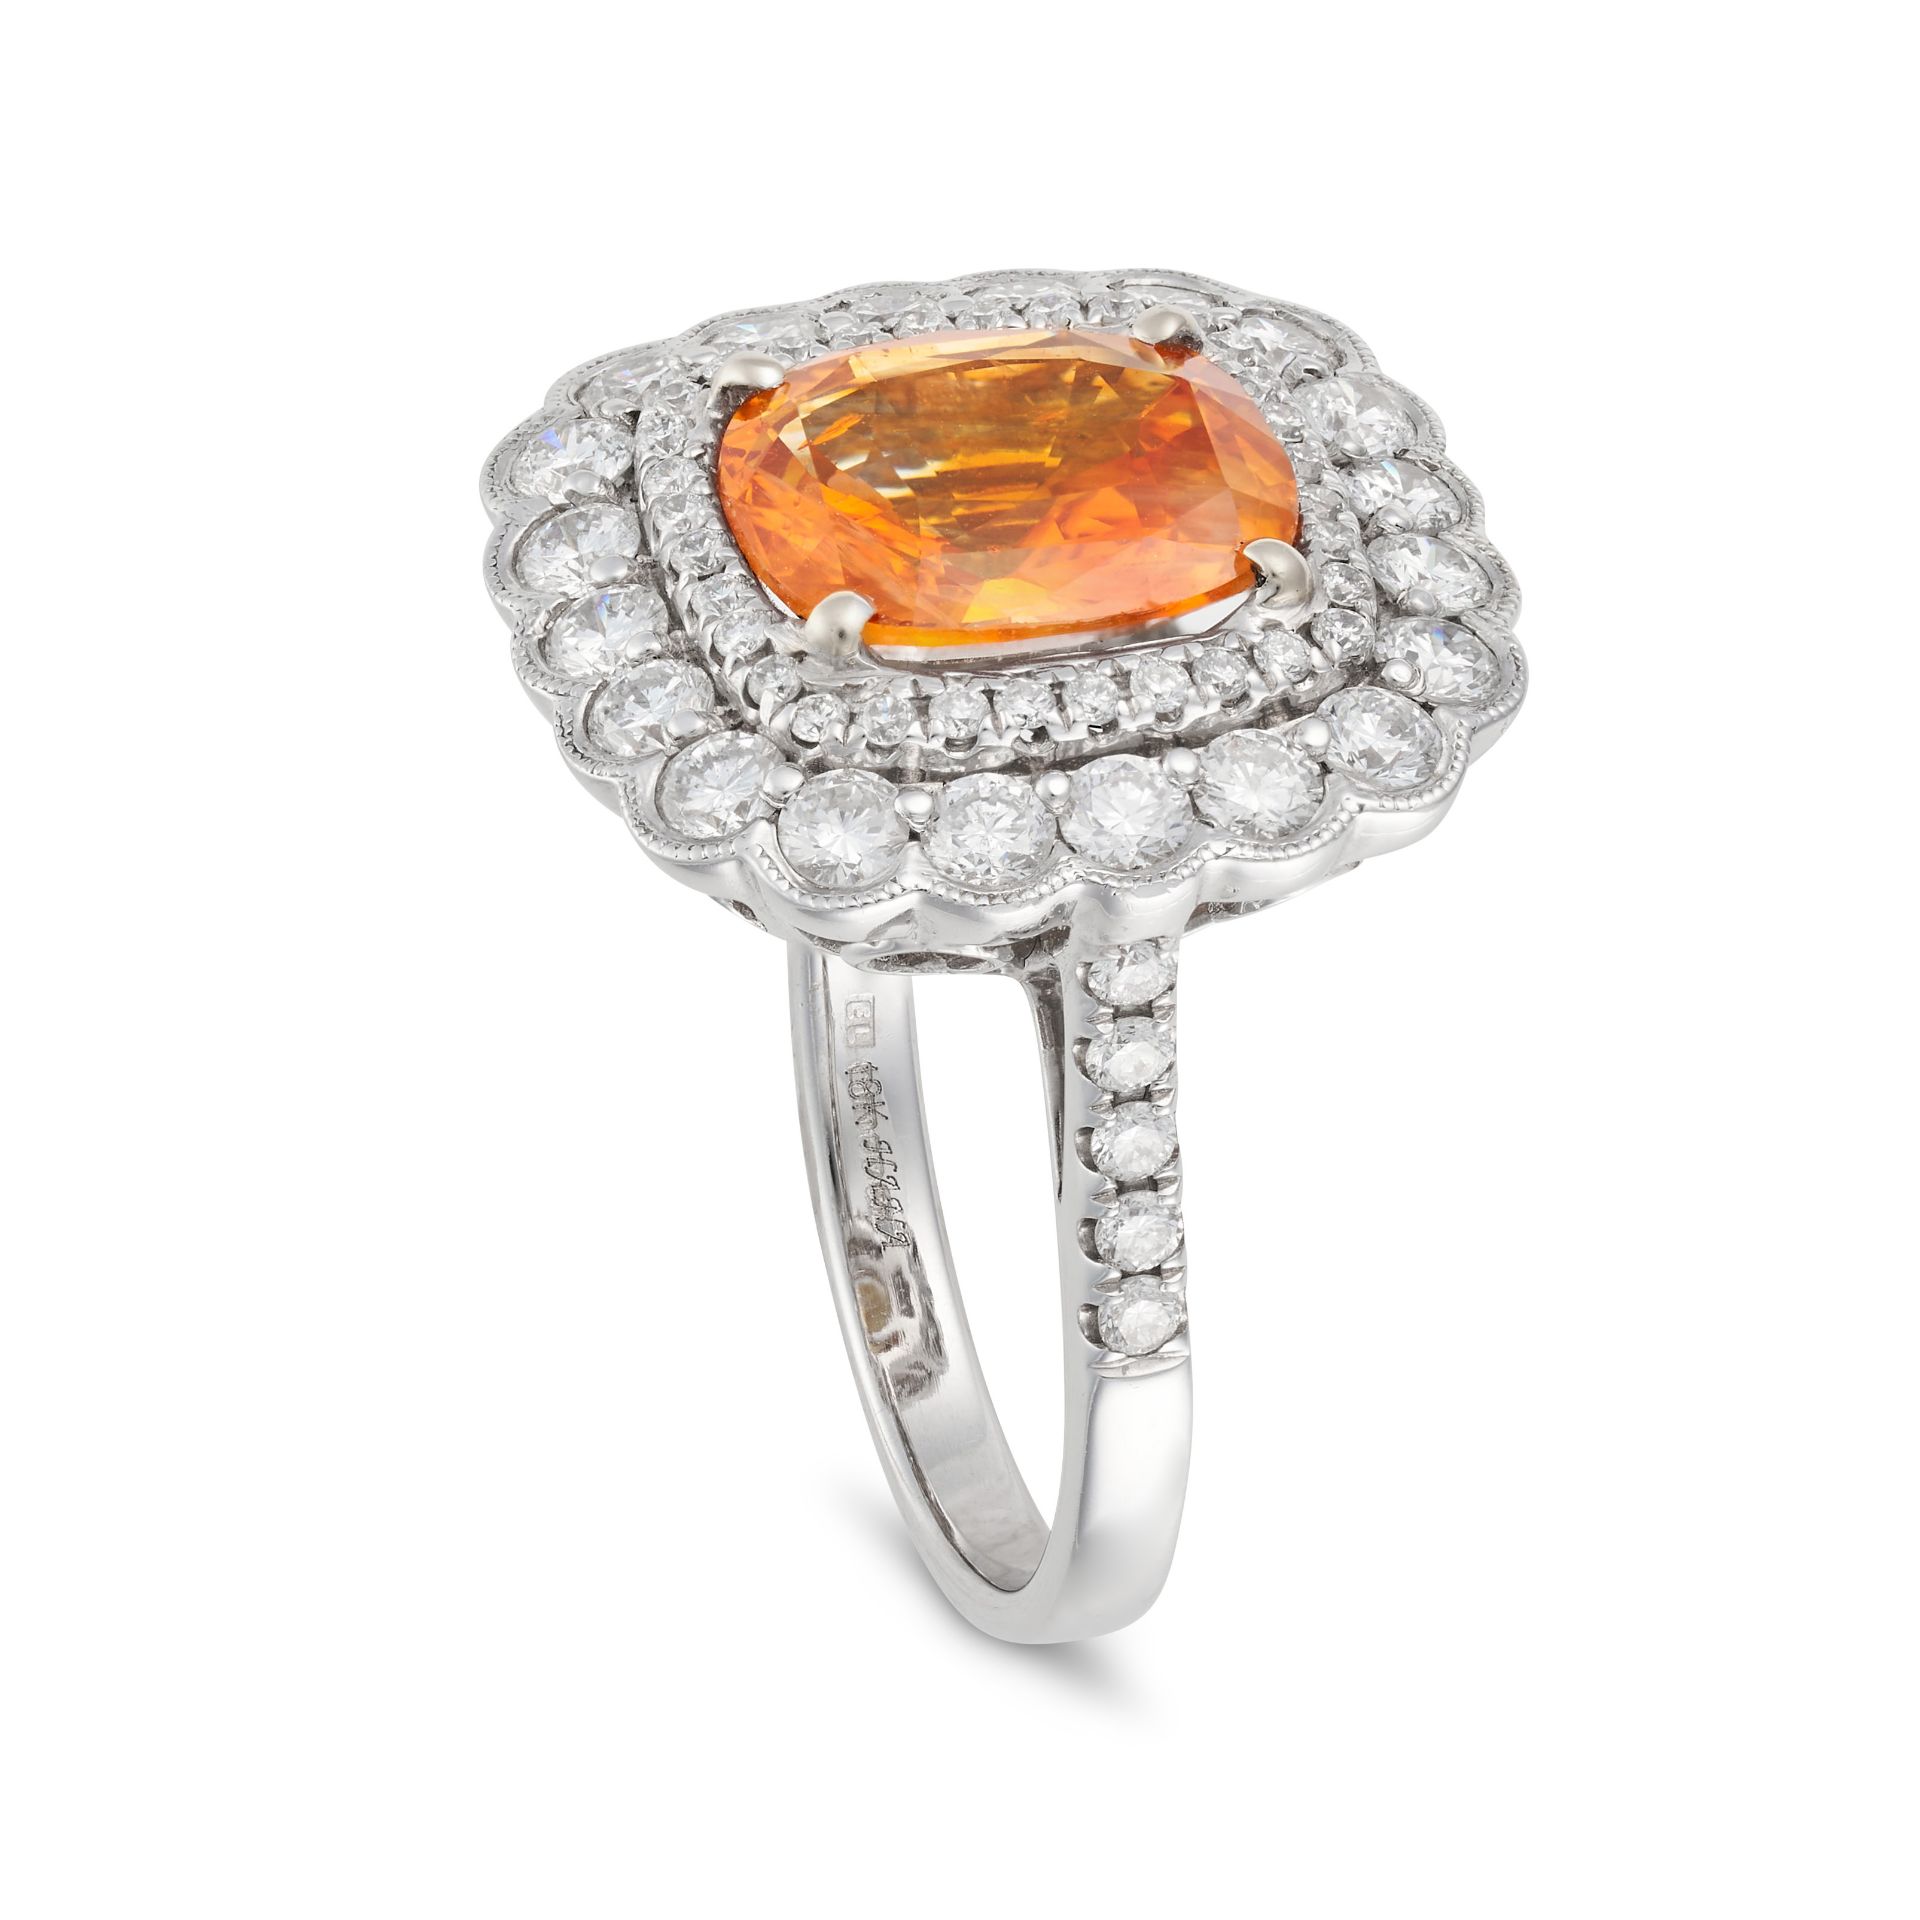 AN ORANGE SAPPHIRE AND DIAMOND CLUSTER RING in 18ct white gold, set with a cushion cut orange sap... - Image 2 of 2